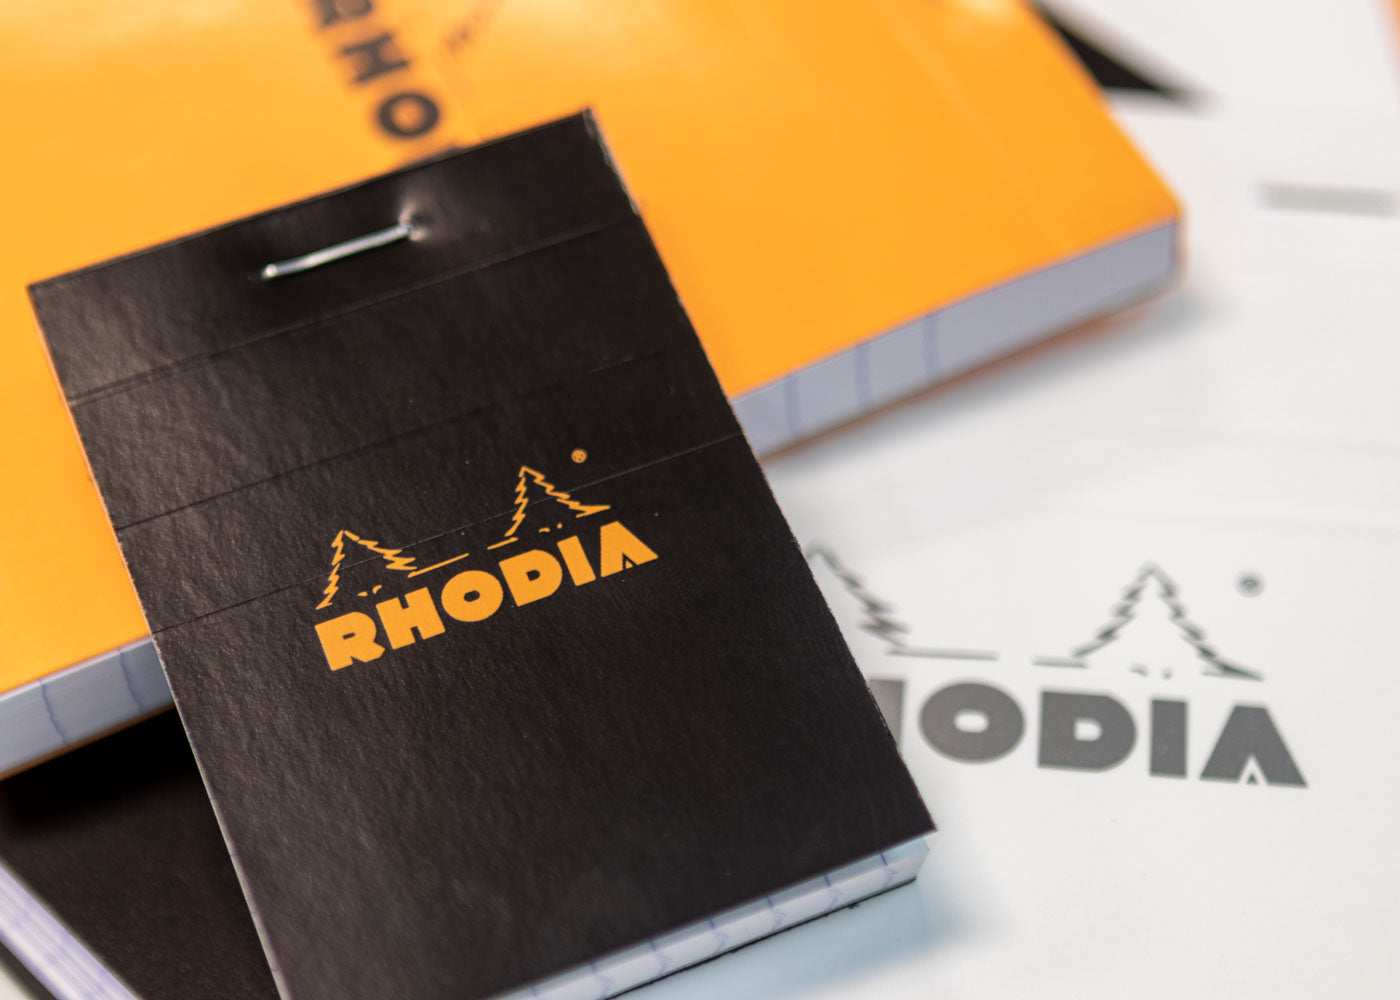 Rhodia Paper  made in France  and founded in 1932, is quality fountain pen friendly paper. Rhodia's name come from the French for Rose. 